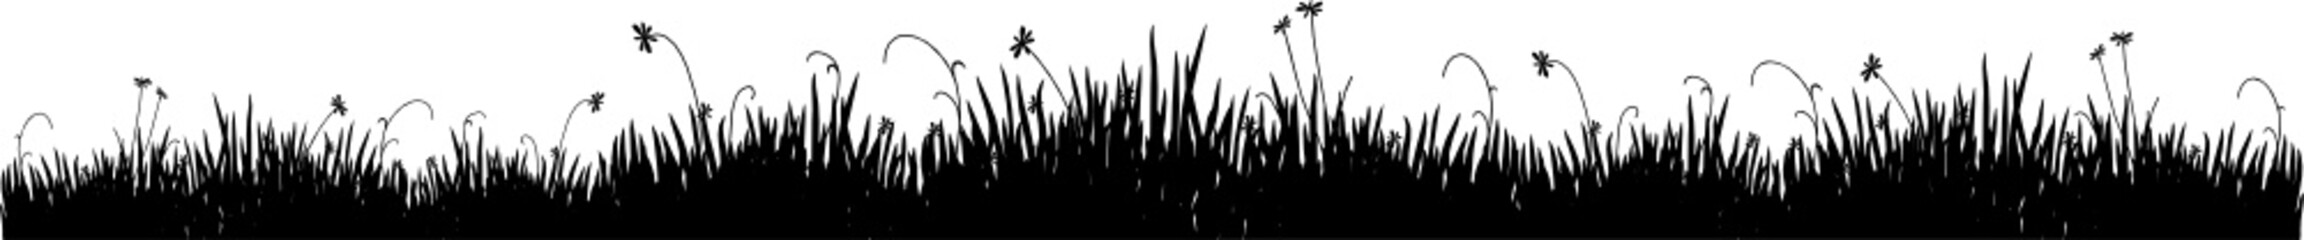 Black silhouette of a meadow grass on a white background - 8485705